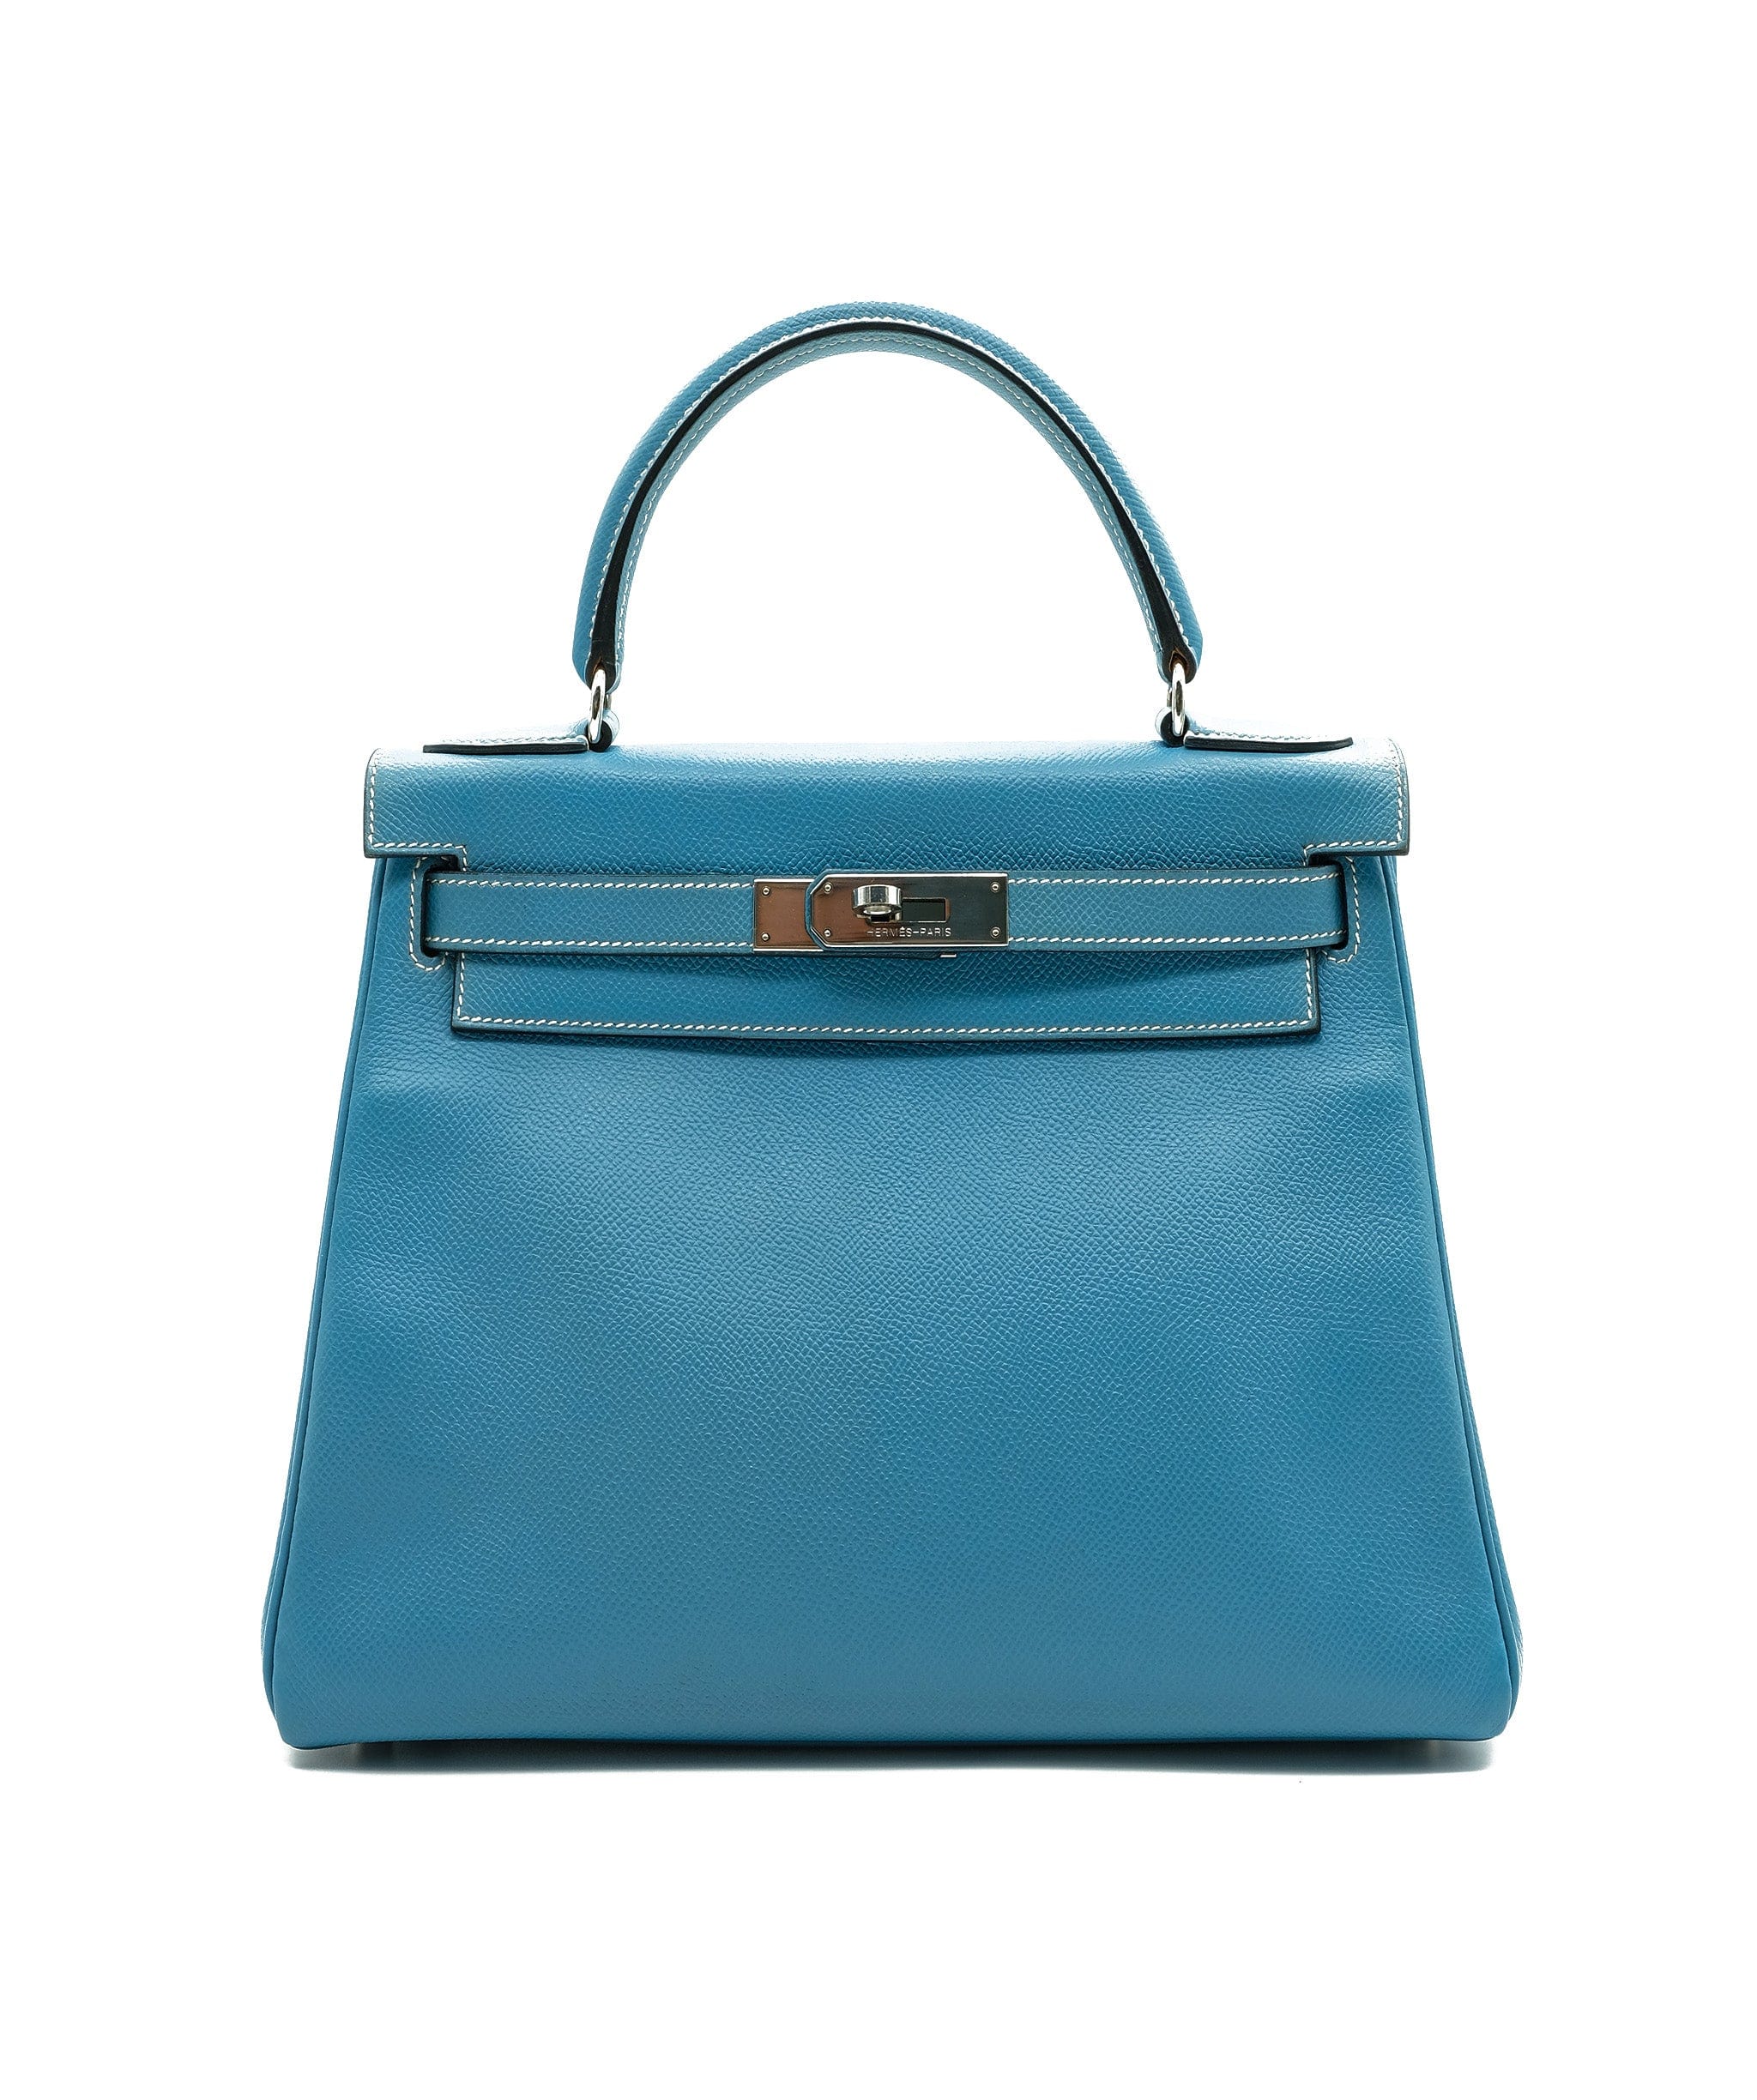 Hermes Personal Kelly bag 28 Sellier Blue electric/ Blue paon